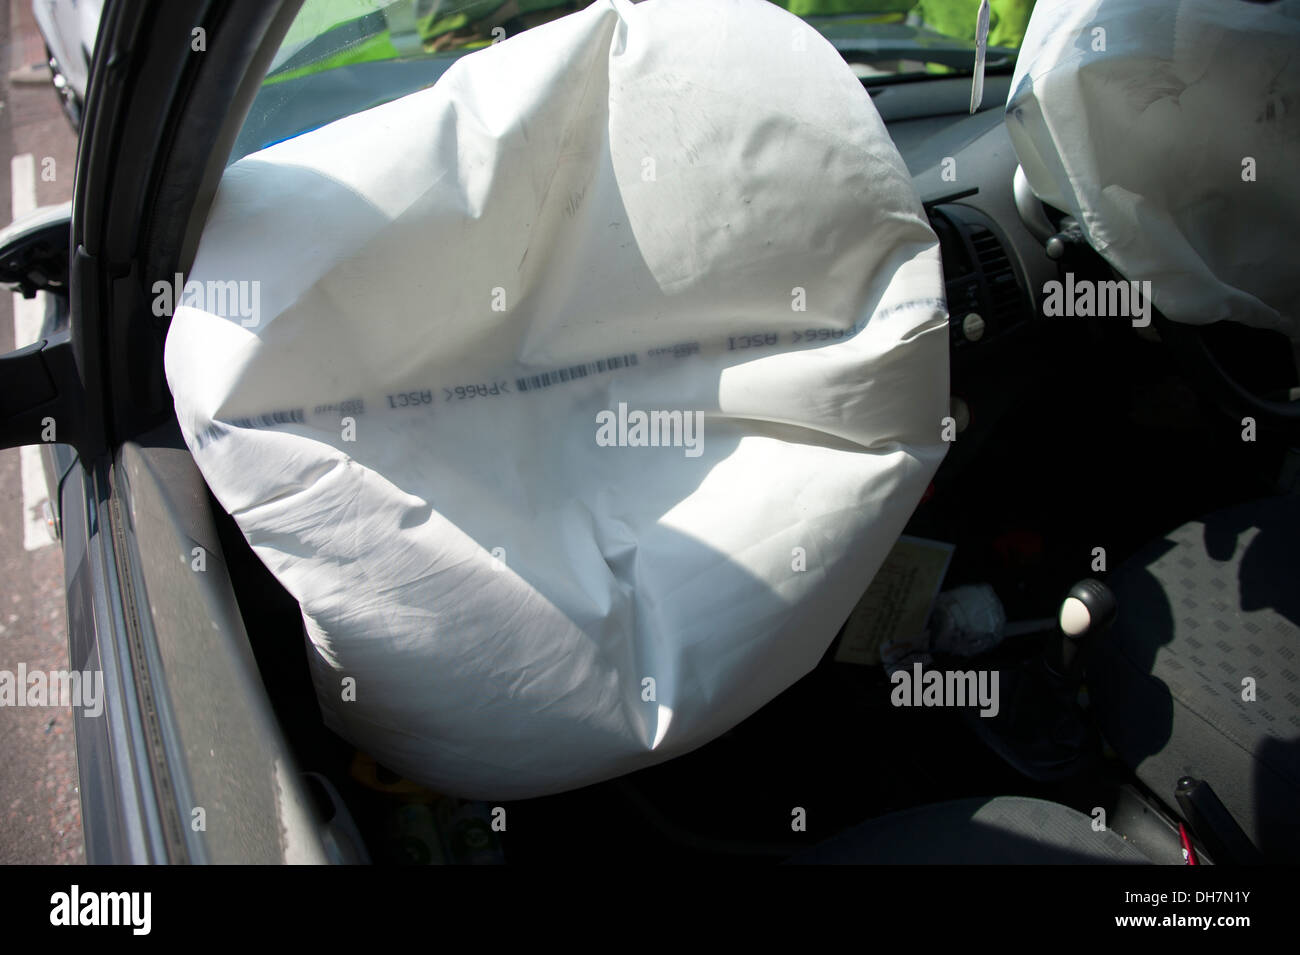 Car Airbags Deployed gone off air bags both 2 two Stock Photo